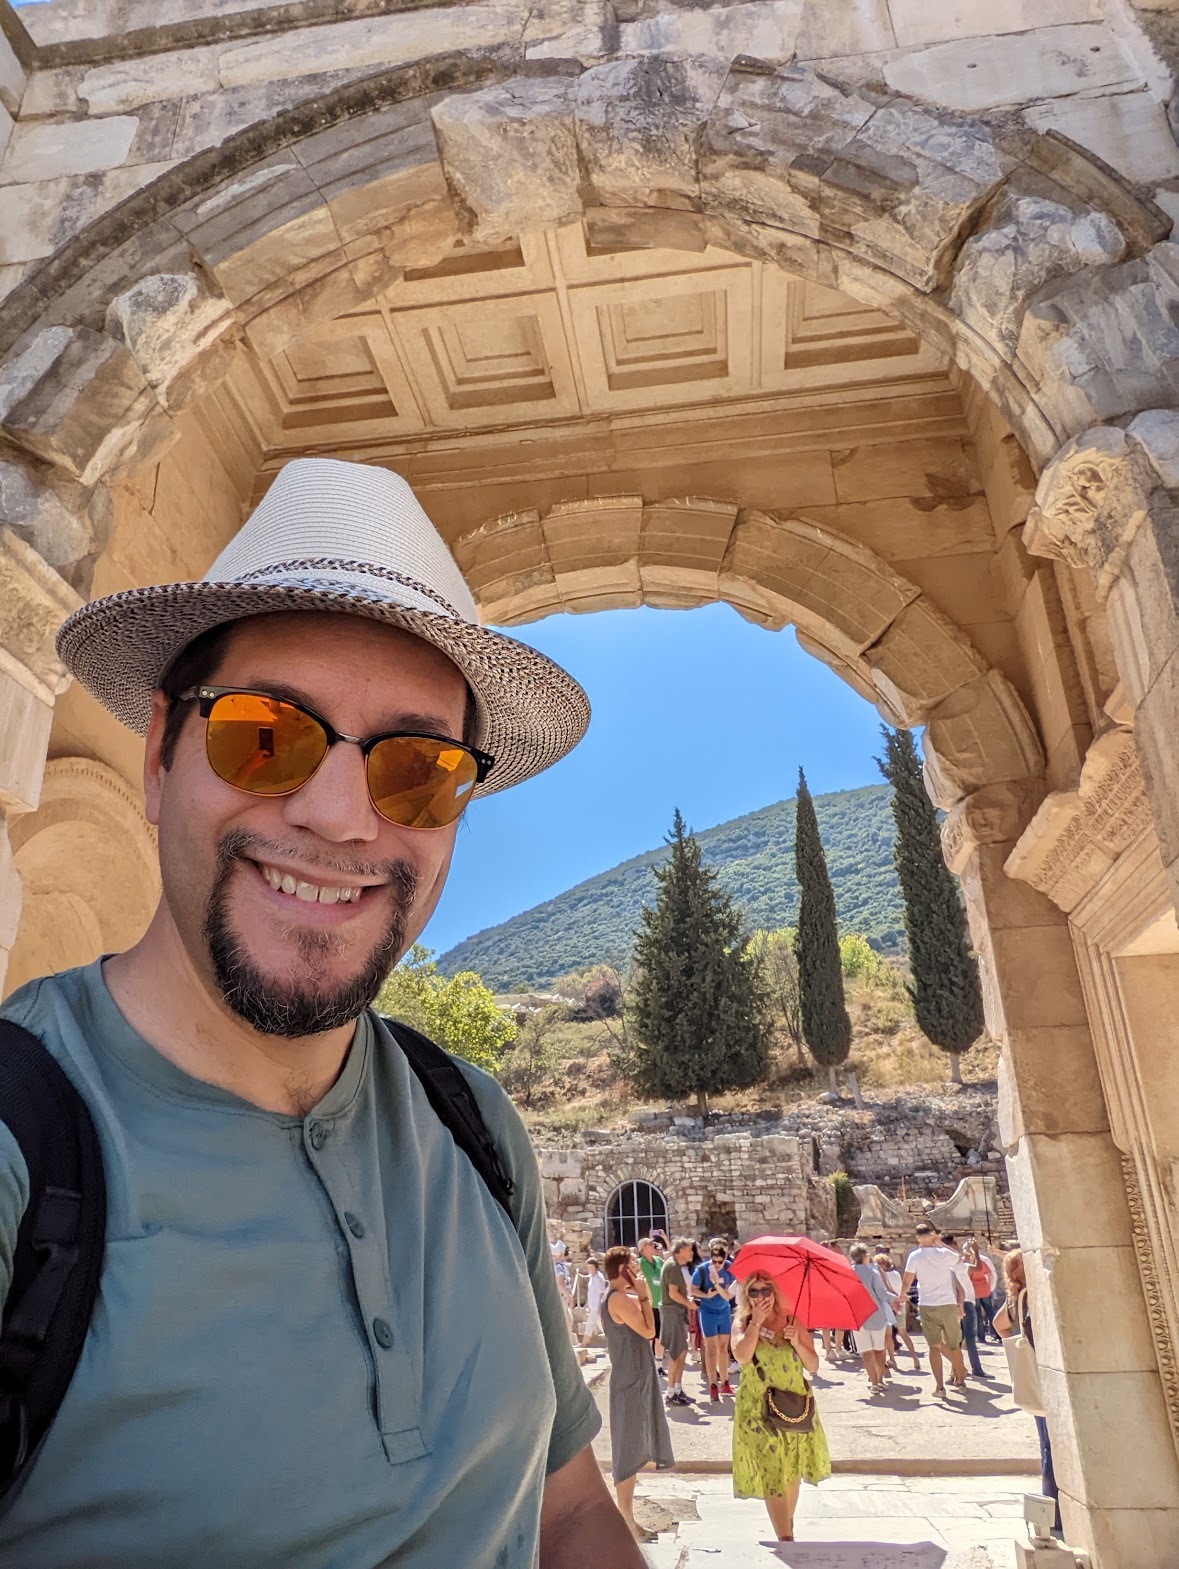 a man taking a selfie in a stone archway